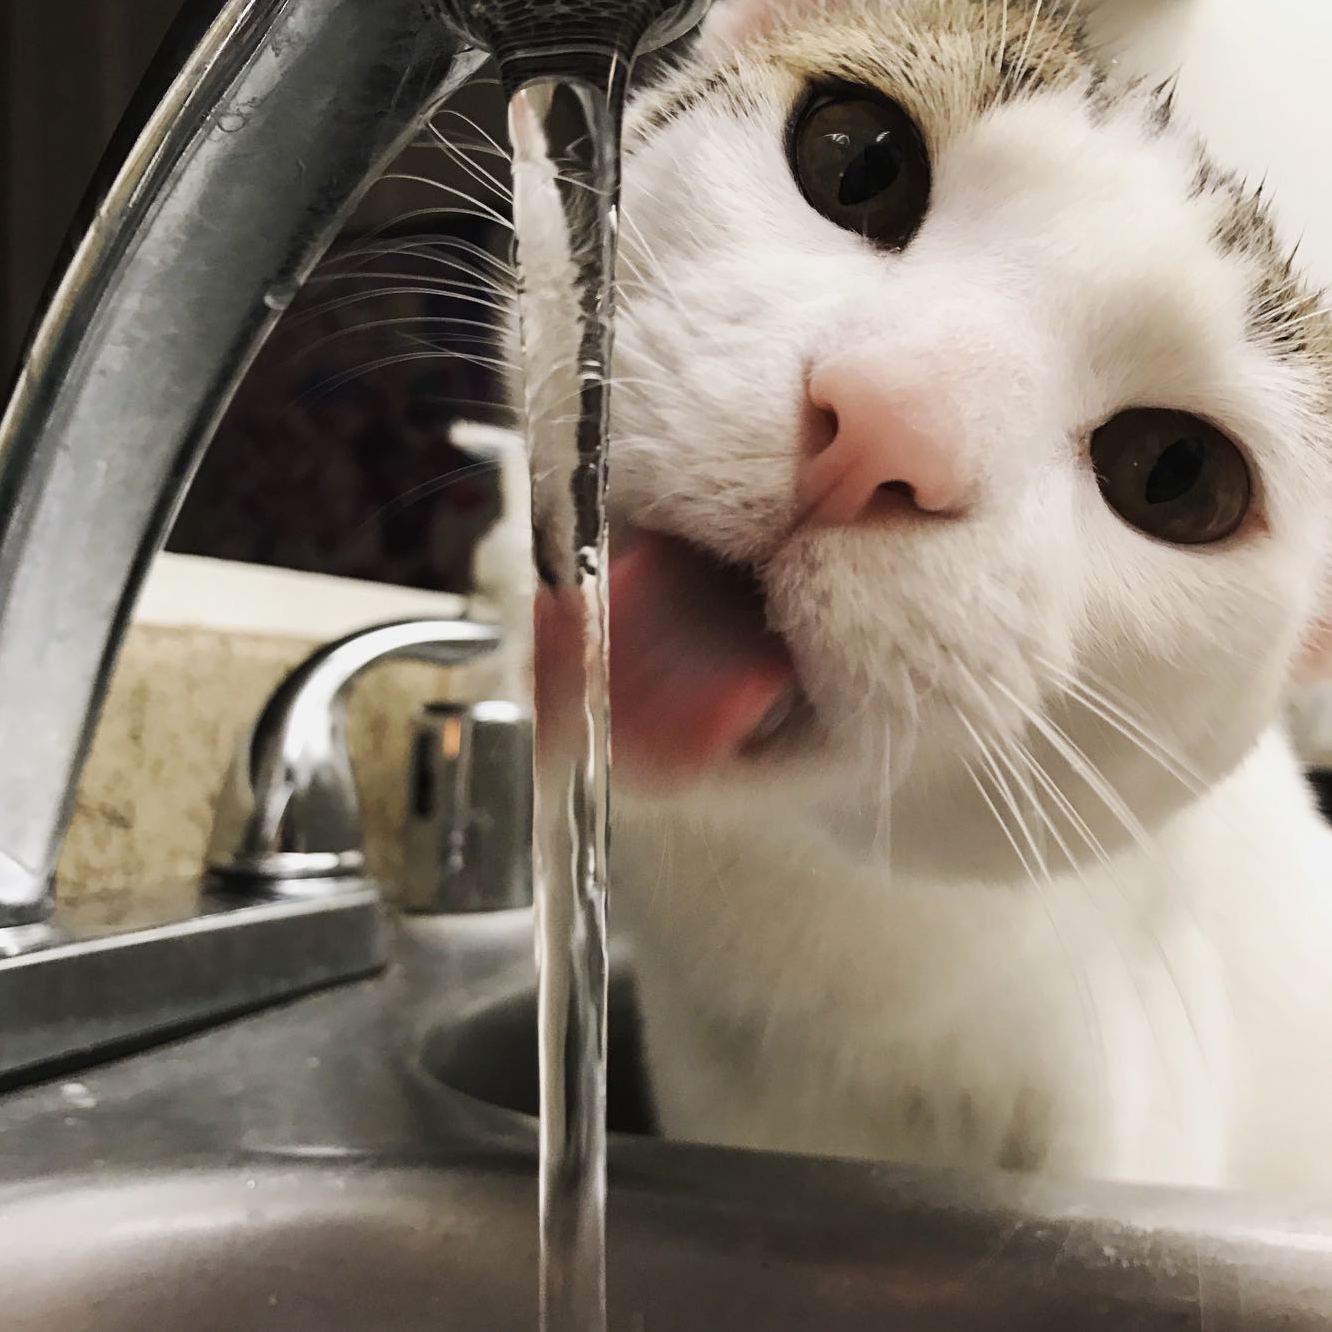 Simon sipping from the sink